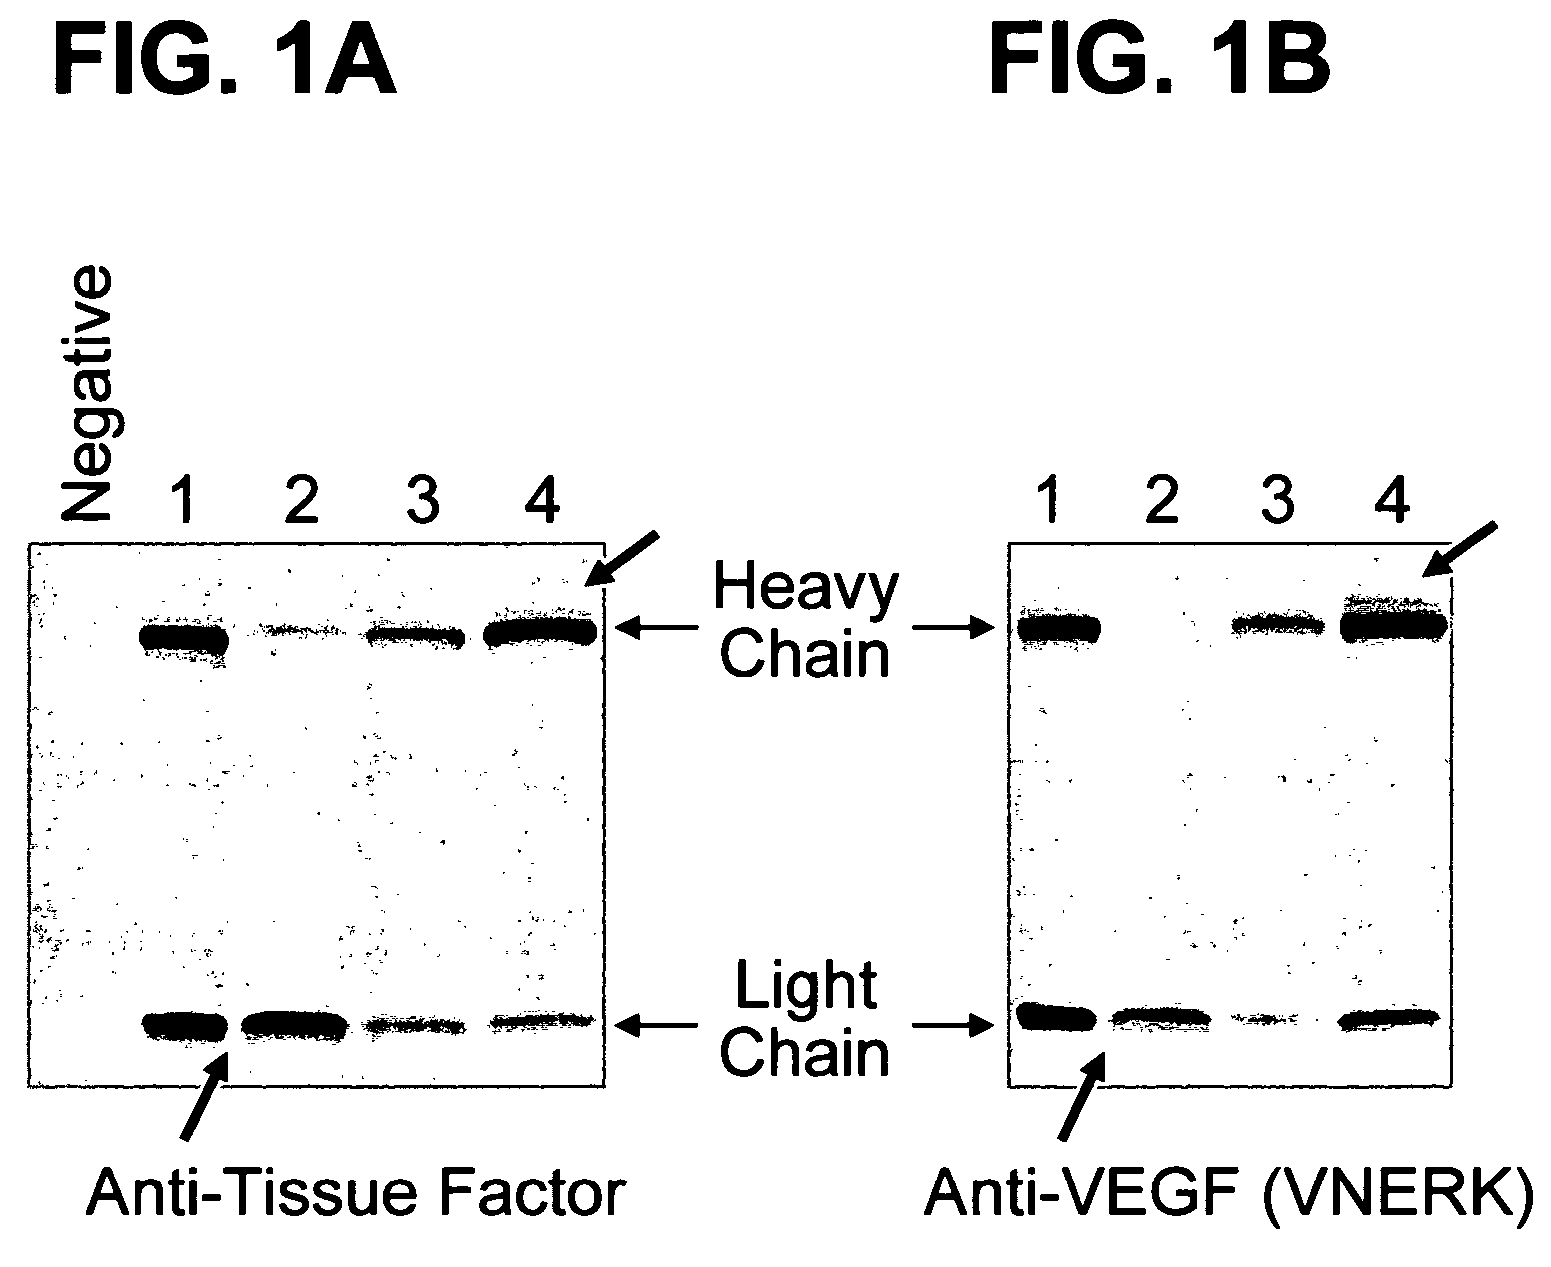 Methods for producing humanized antibodies and improving yield of antibodies or antigen binding fragments in cell culture